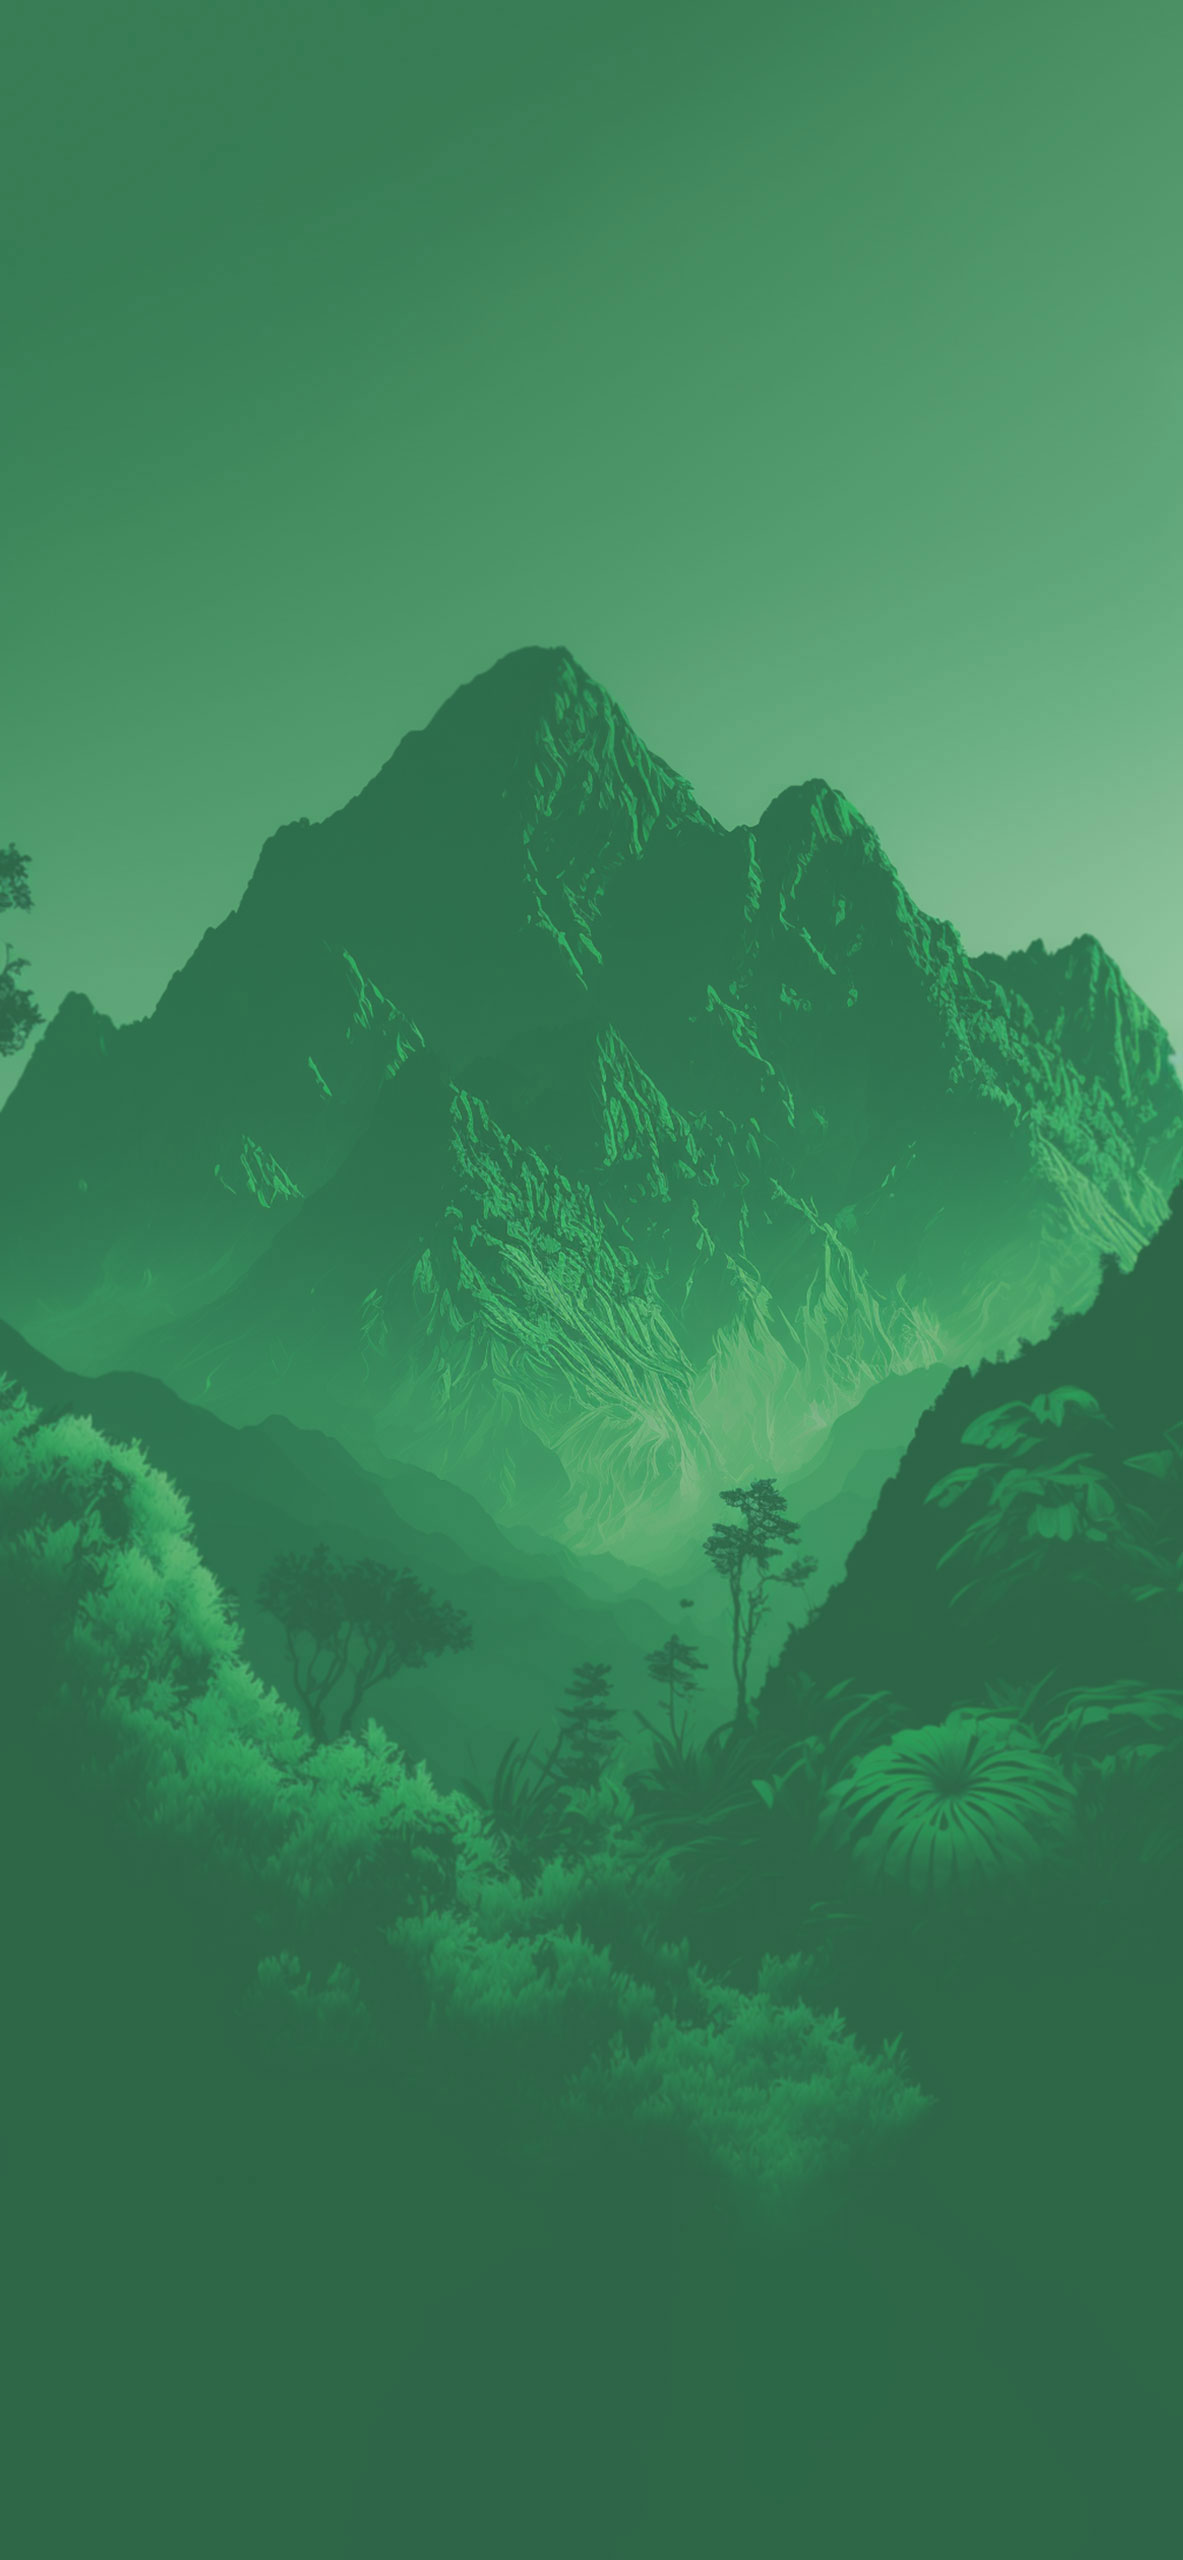 mountains aesthetic green background